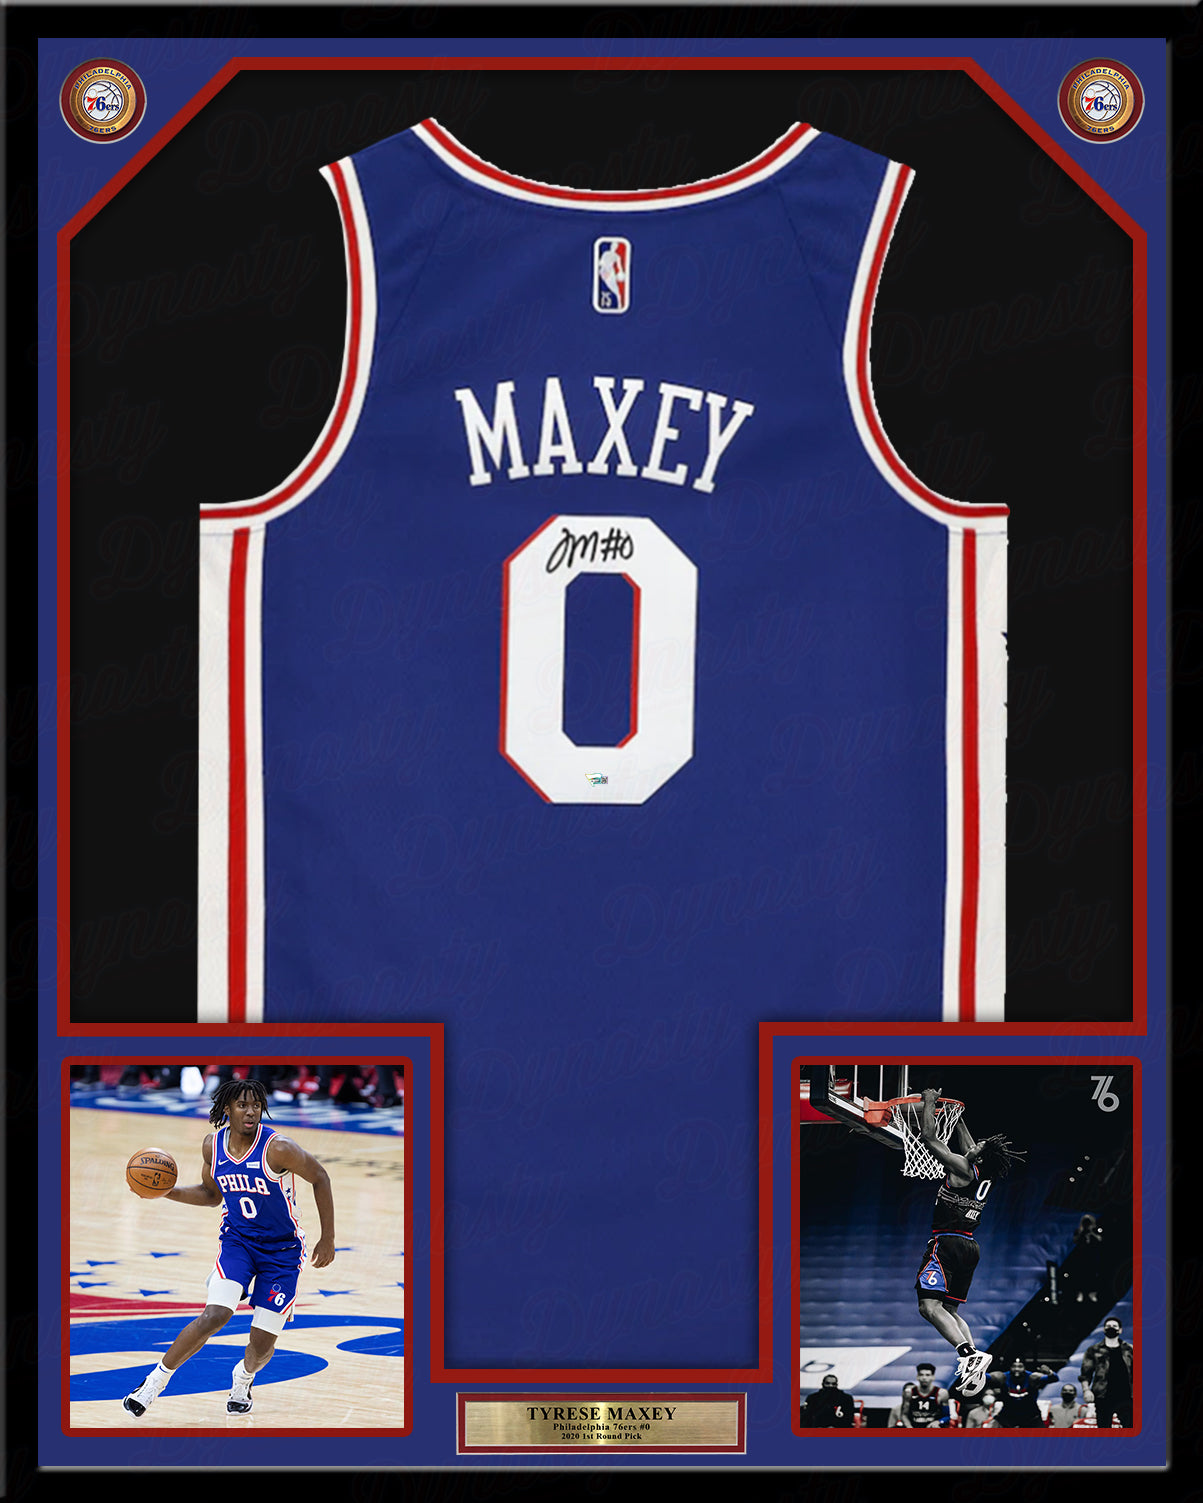 Tyrese Maxey Philadelphia 76ers Autographed Framed Blue Basketball Jersey - Dynasty Sports & Framing 